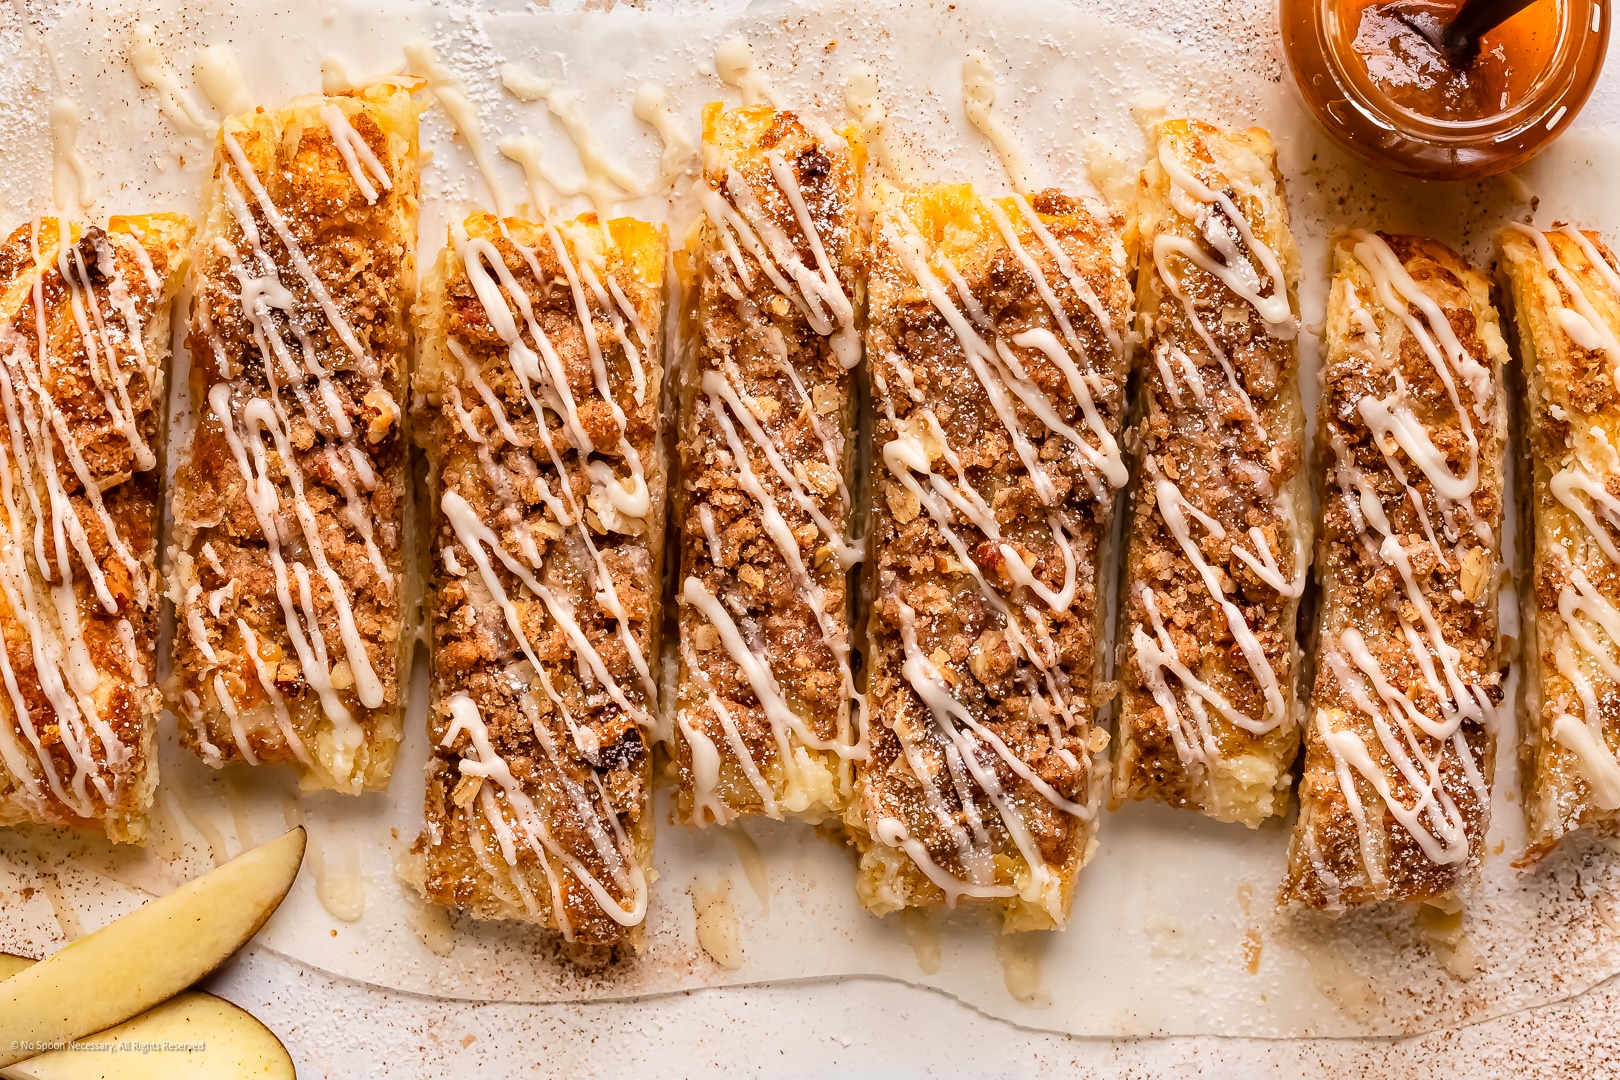 Nutella, Peanut Butter and Banana stuffed Breakfast Braid - Two in